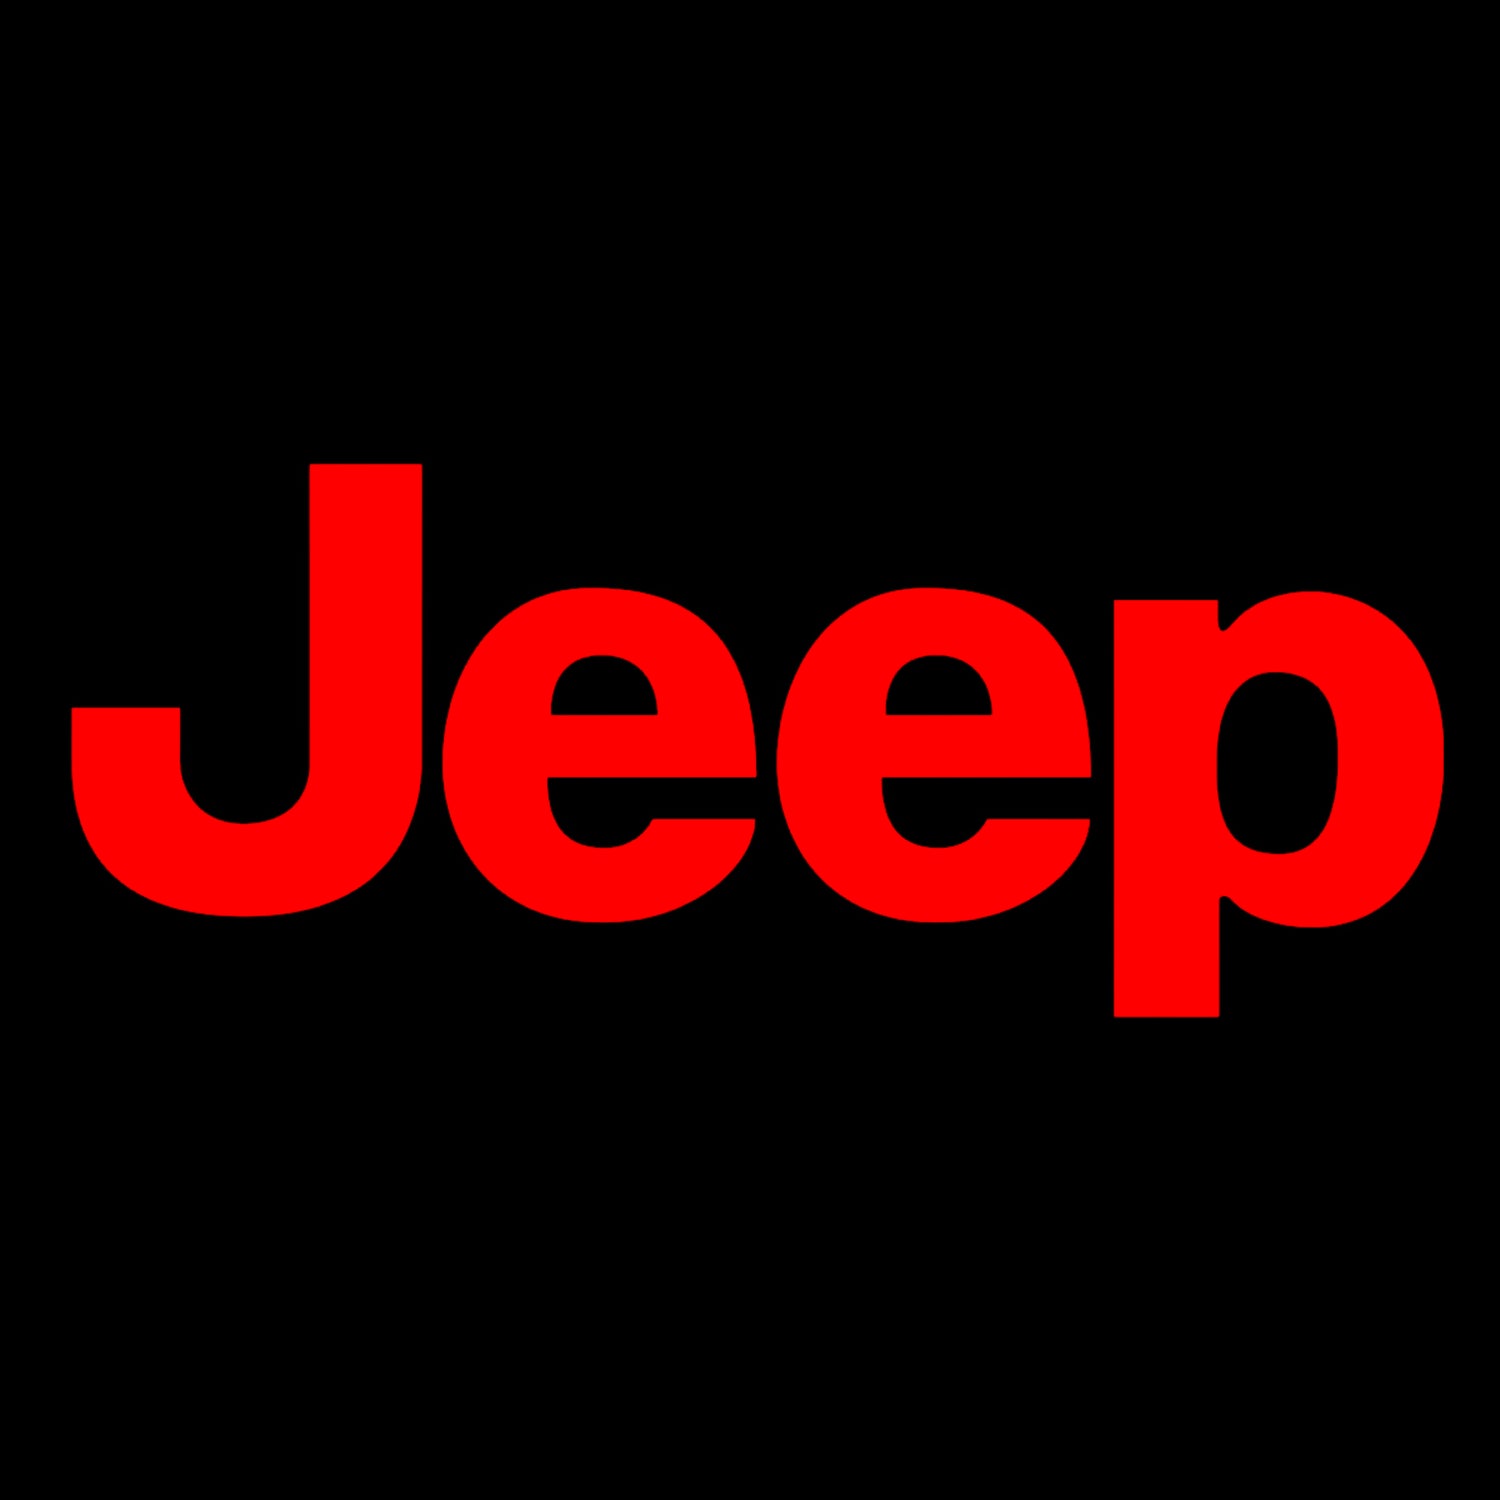 Jeep logo in red with black background